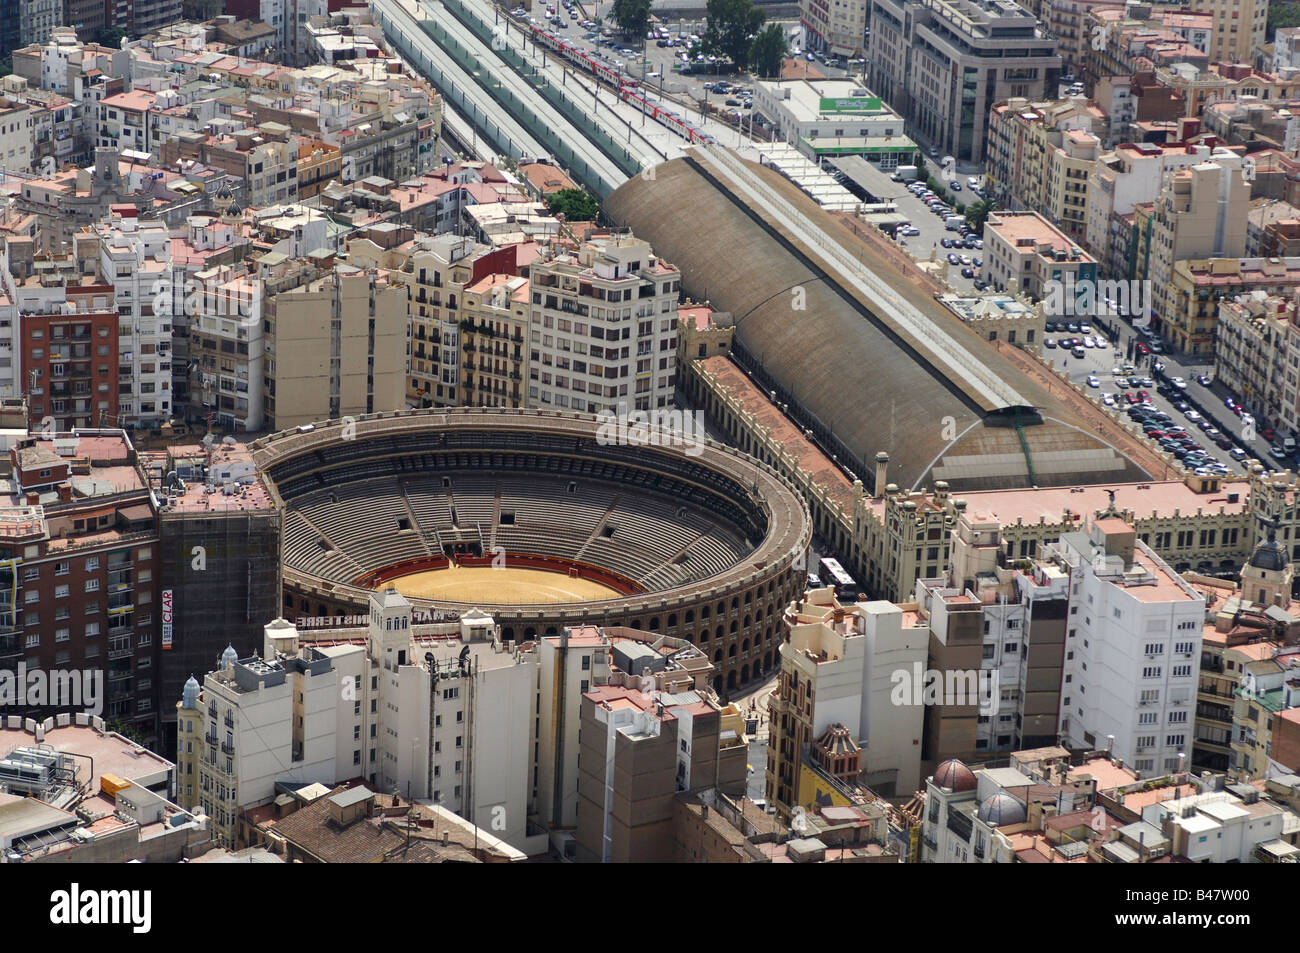 The Bull Ring and Central Railway station Valencia Spain Stock Photo - Alamy